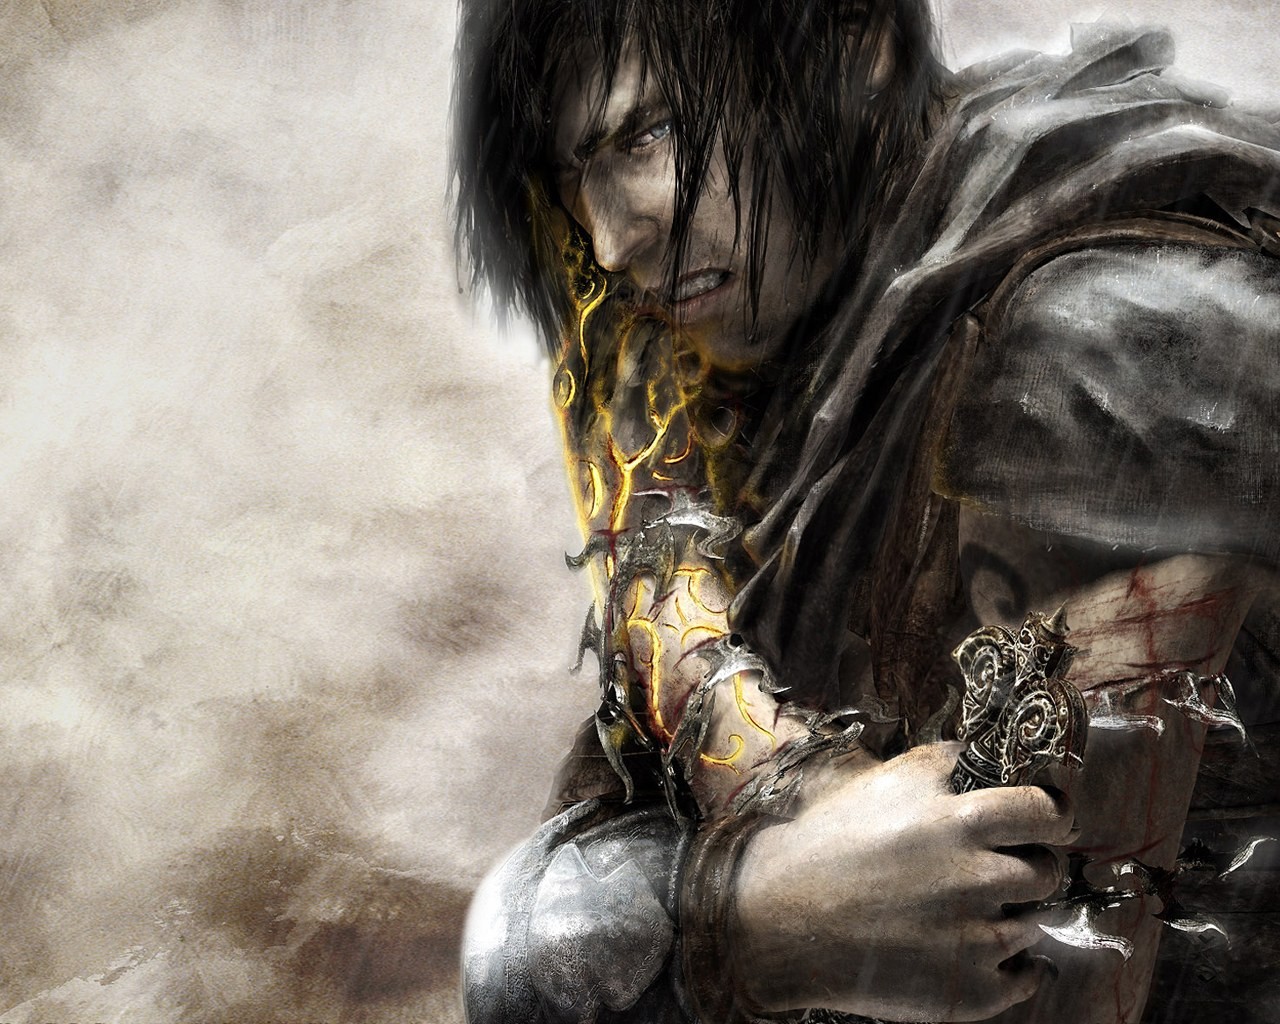 Prince of Persia full range of wallpapers #24 - 1280x1024